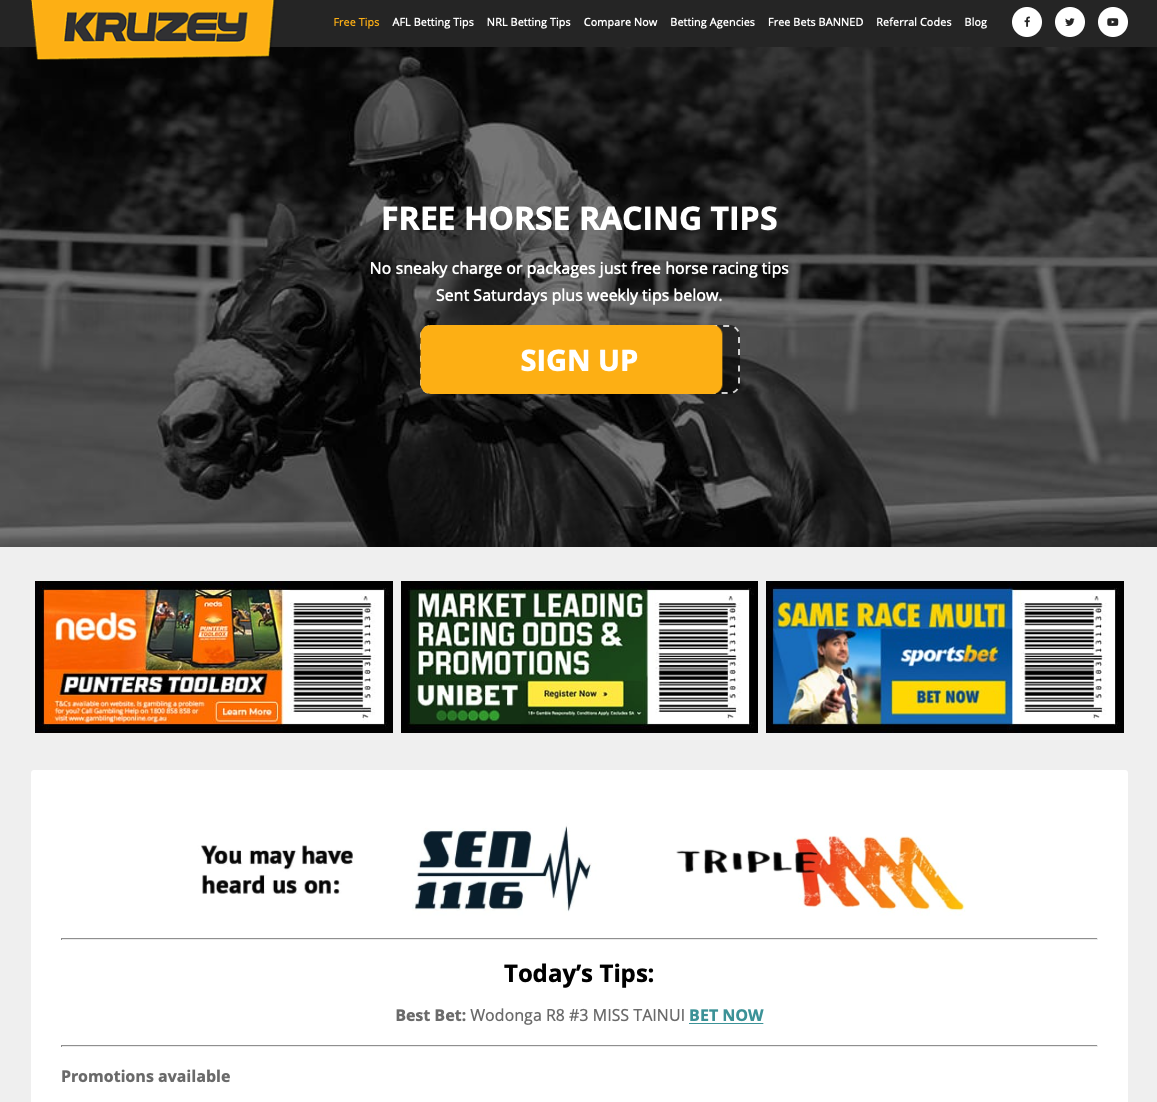 Free horse racing tips